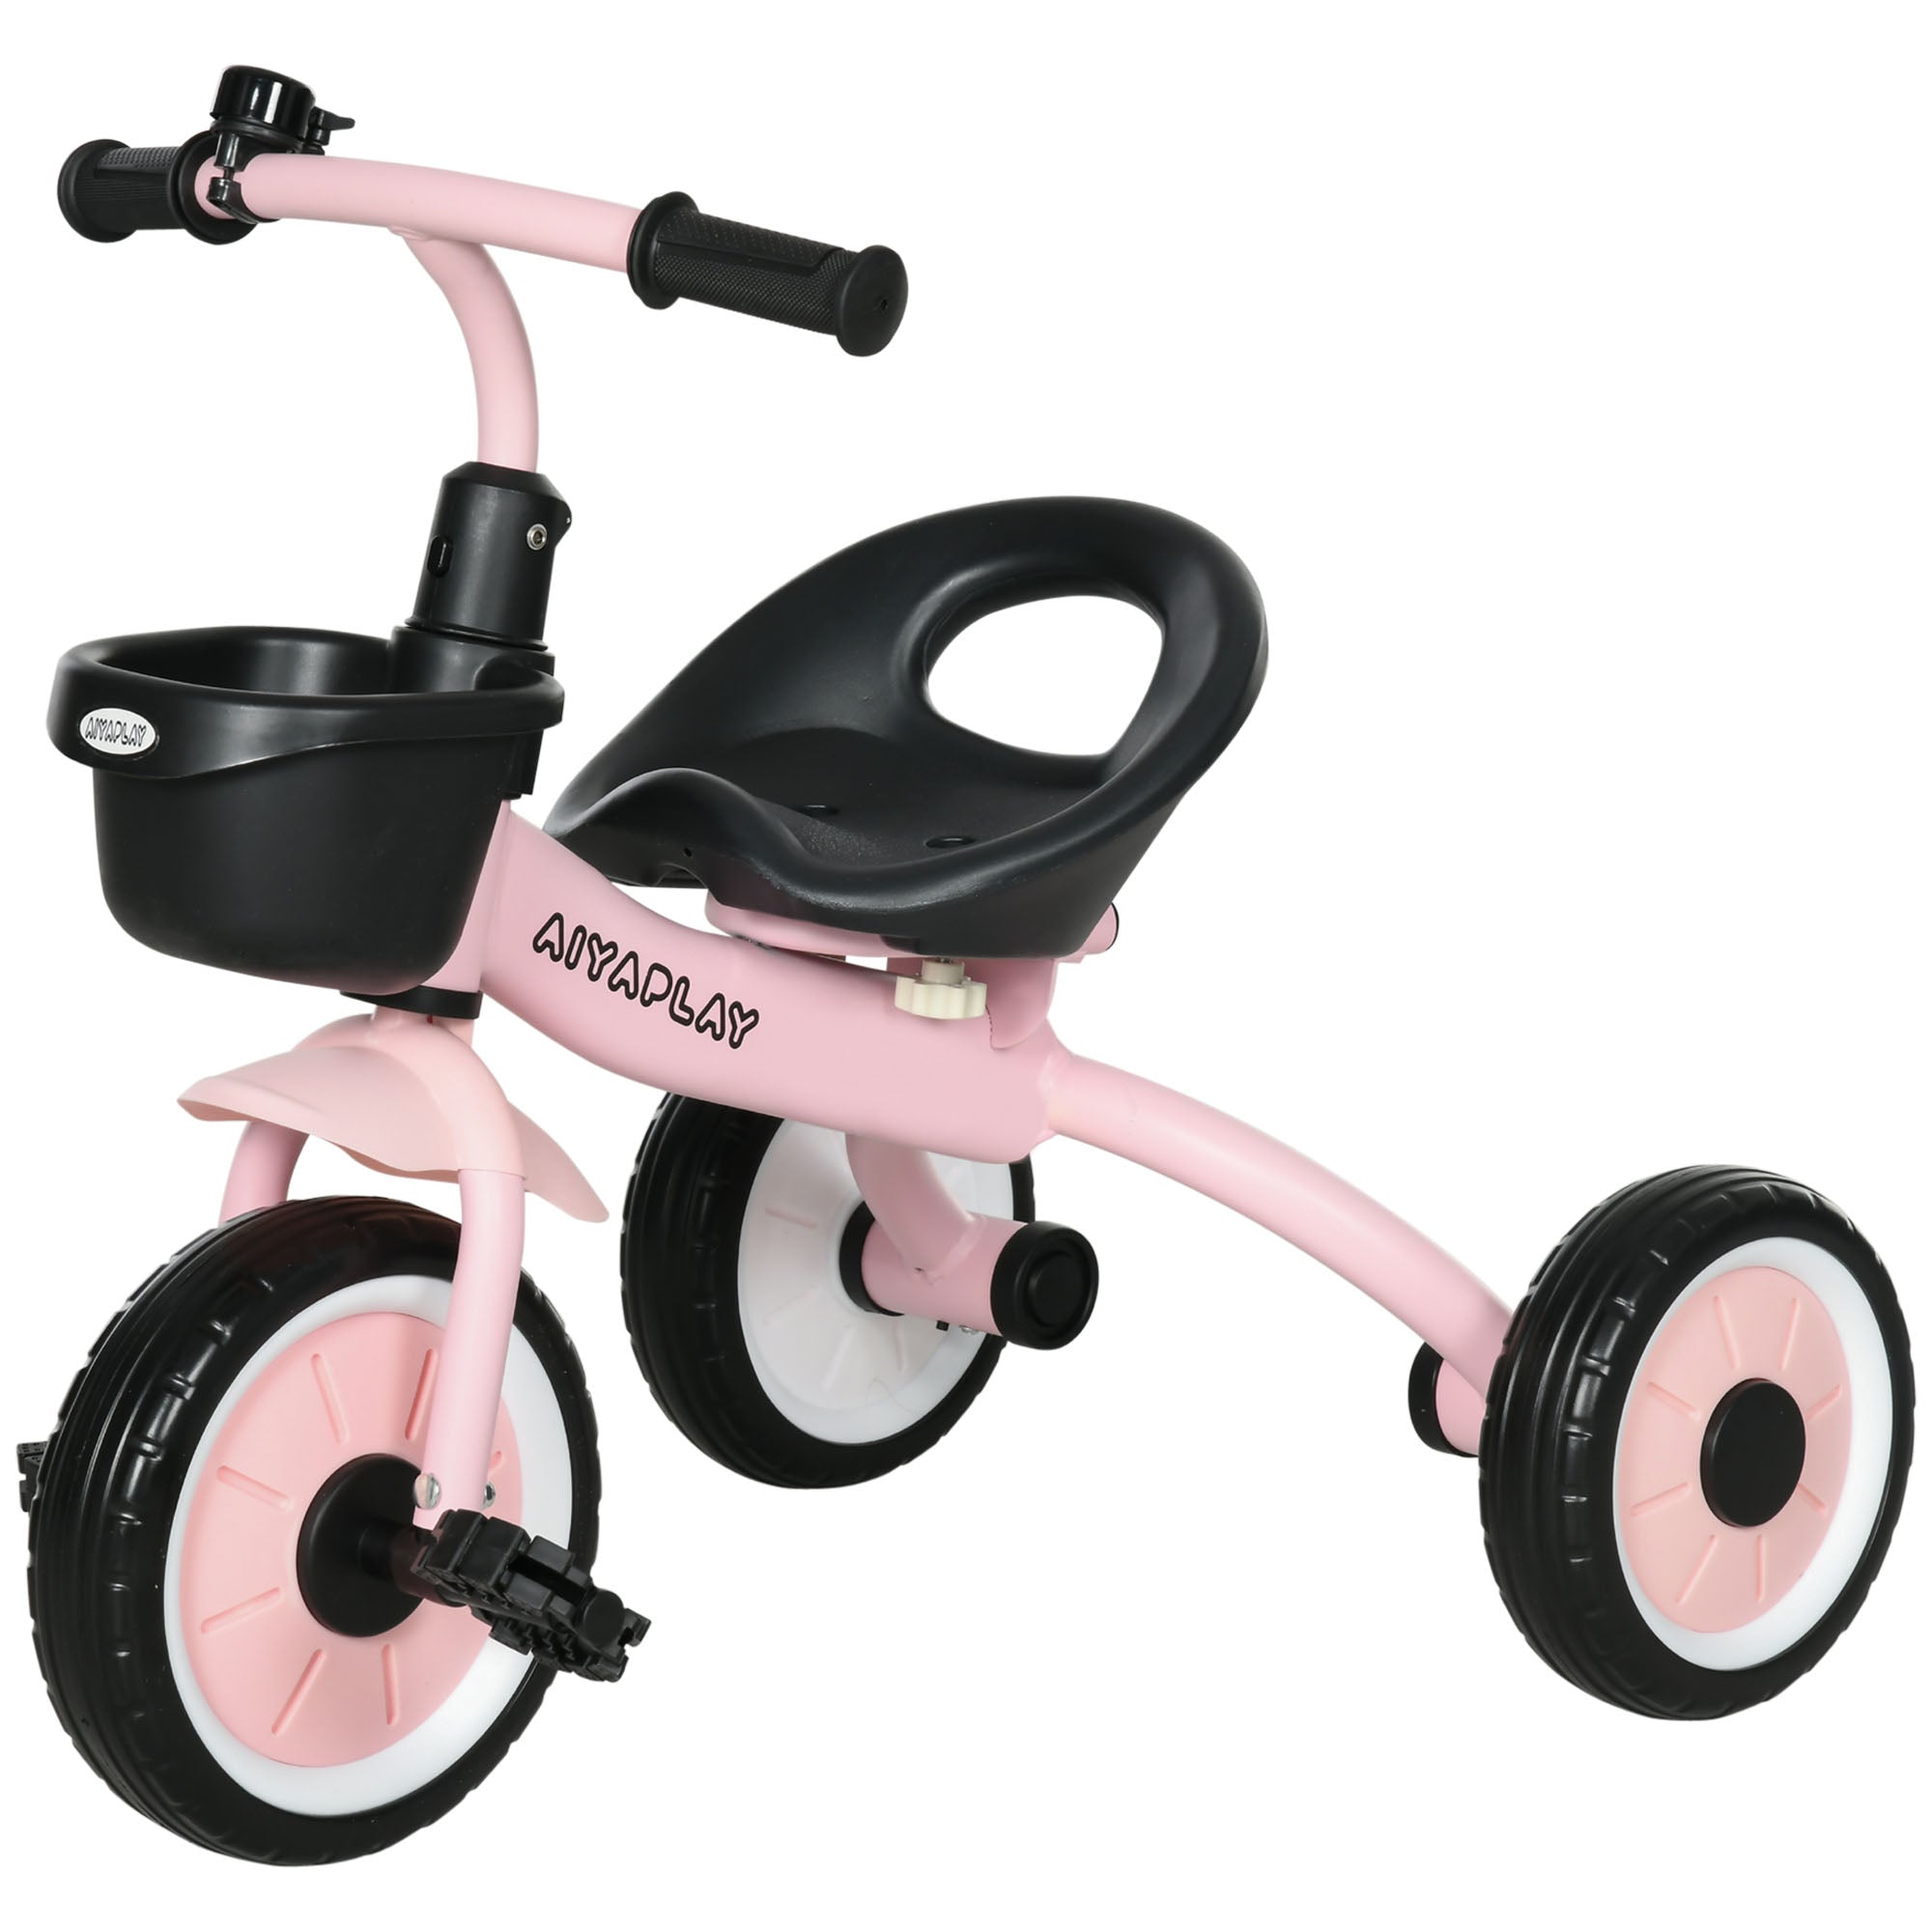 Kids Trike, Tricycle, with Adjustable Seat, Basket, Bell, for Ages 2-5 Years - Pink-0